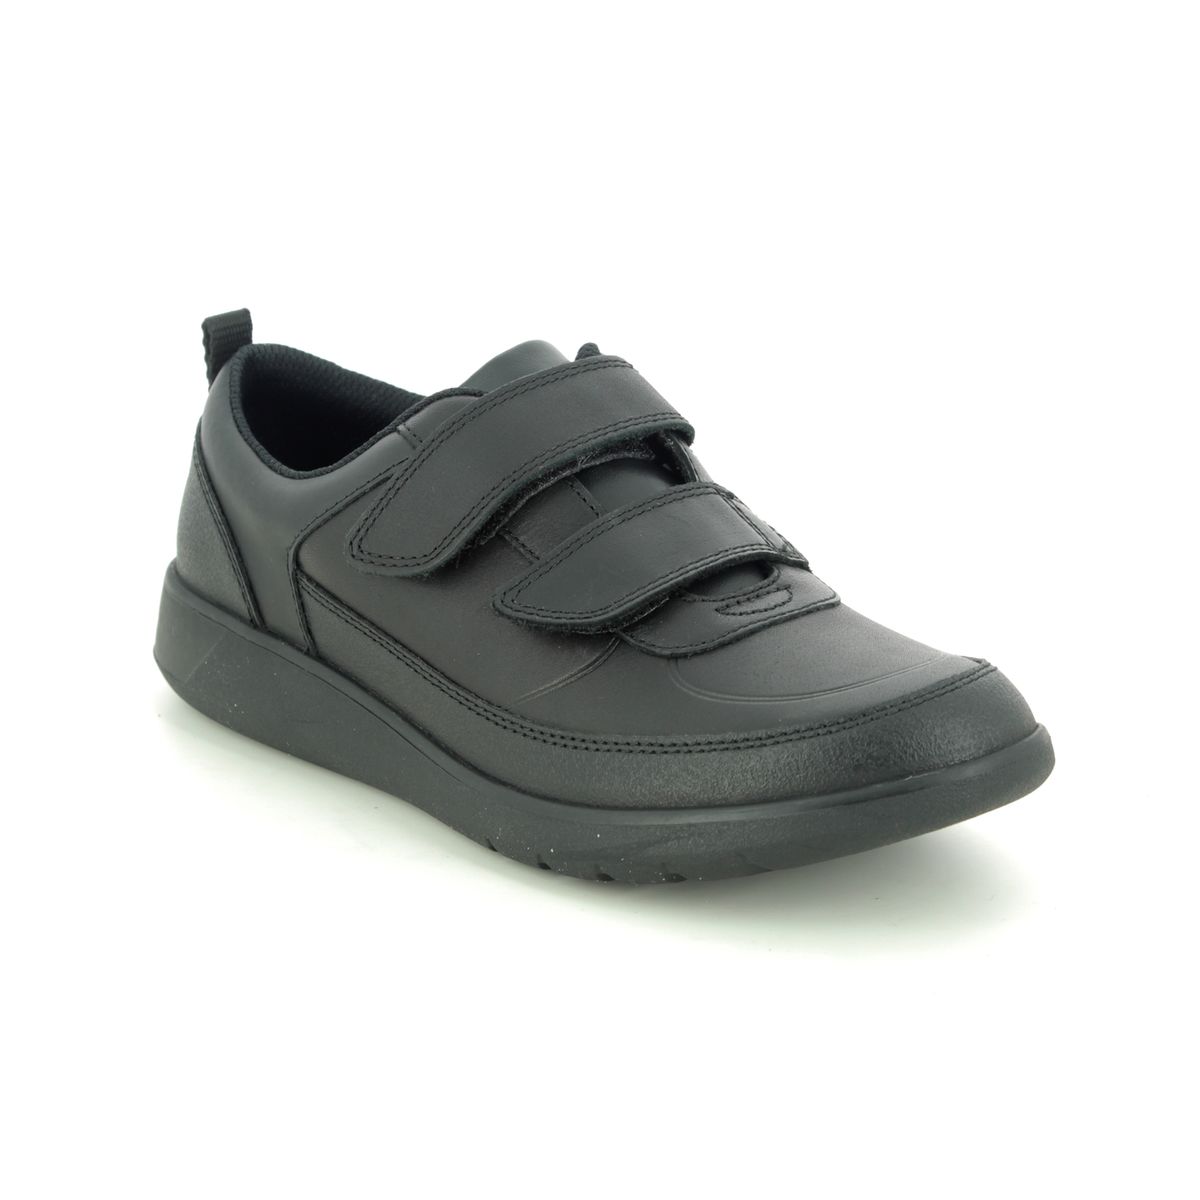 Clarks Scape Flare Y Black Leather Kids Boys Shoes 494098H In Size 5 In Plain Black Leather H Width Fitting Extra Wide For School For kids